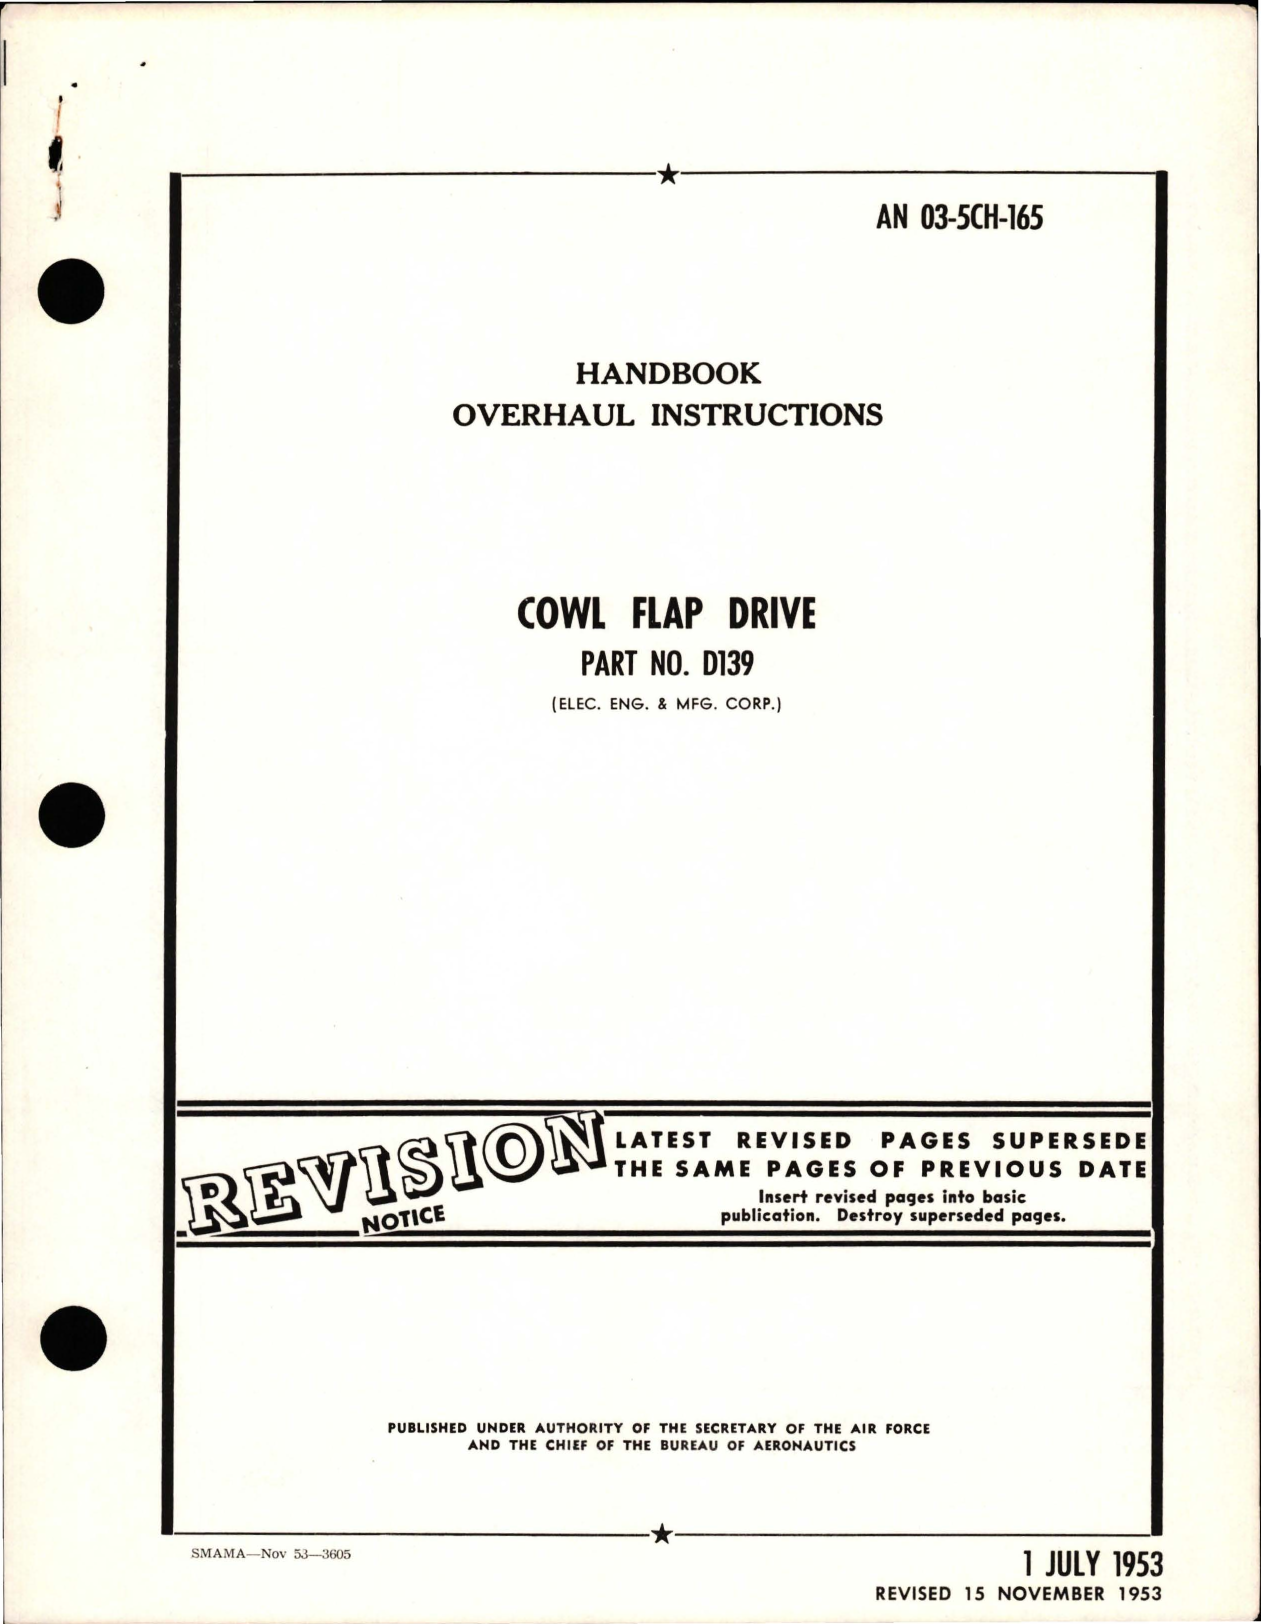 Sample page 1 from AirCorps Library document: Overhaul Instructions for Cowl Flap Drive - Part D139 